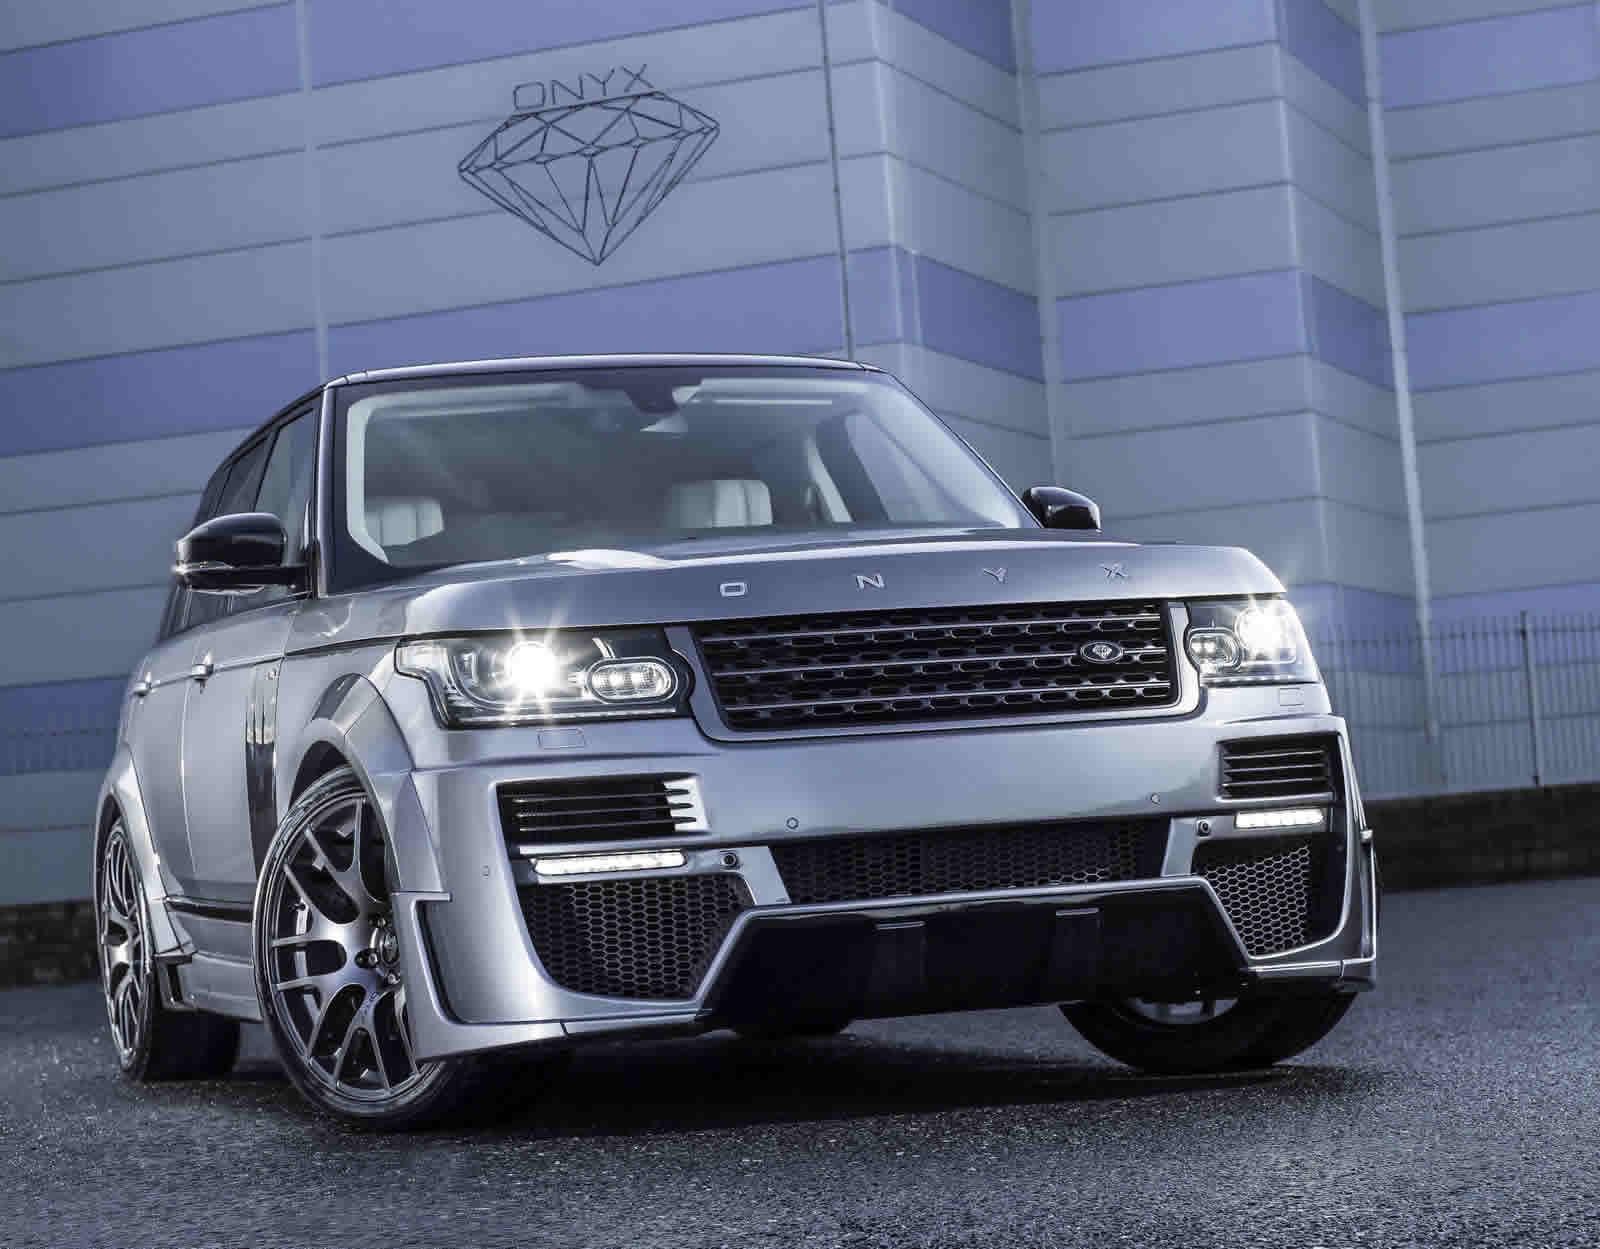 2013 Land Rover Range Rover Aspen Ultimate Series by Onyx Concept